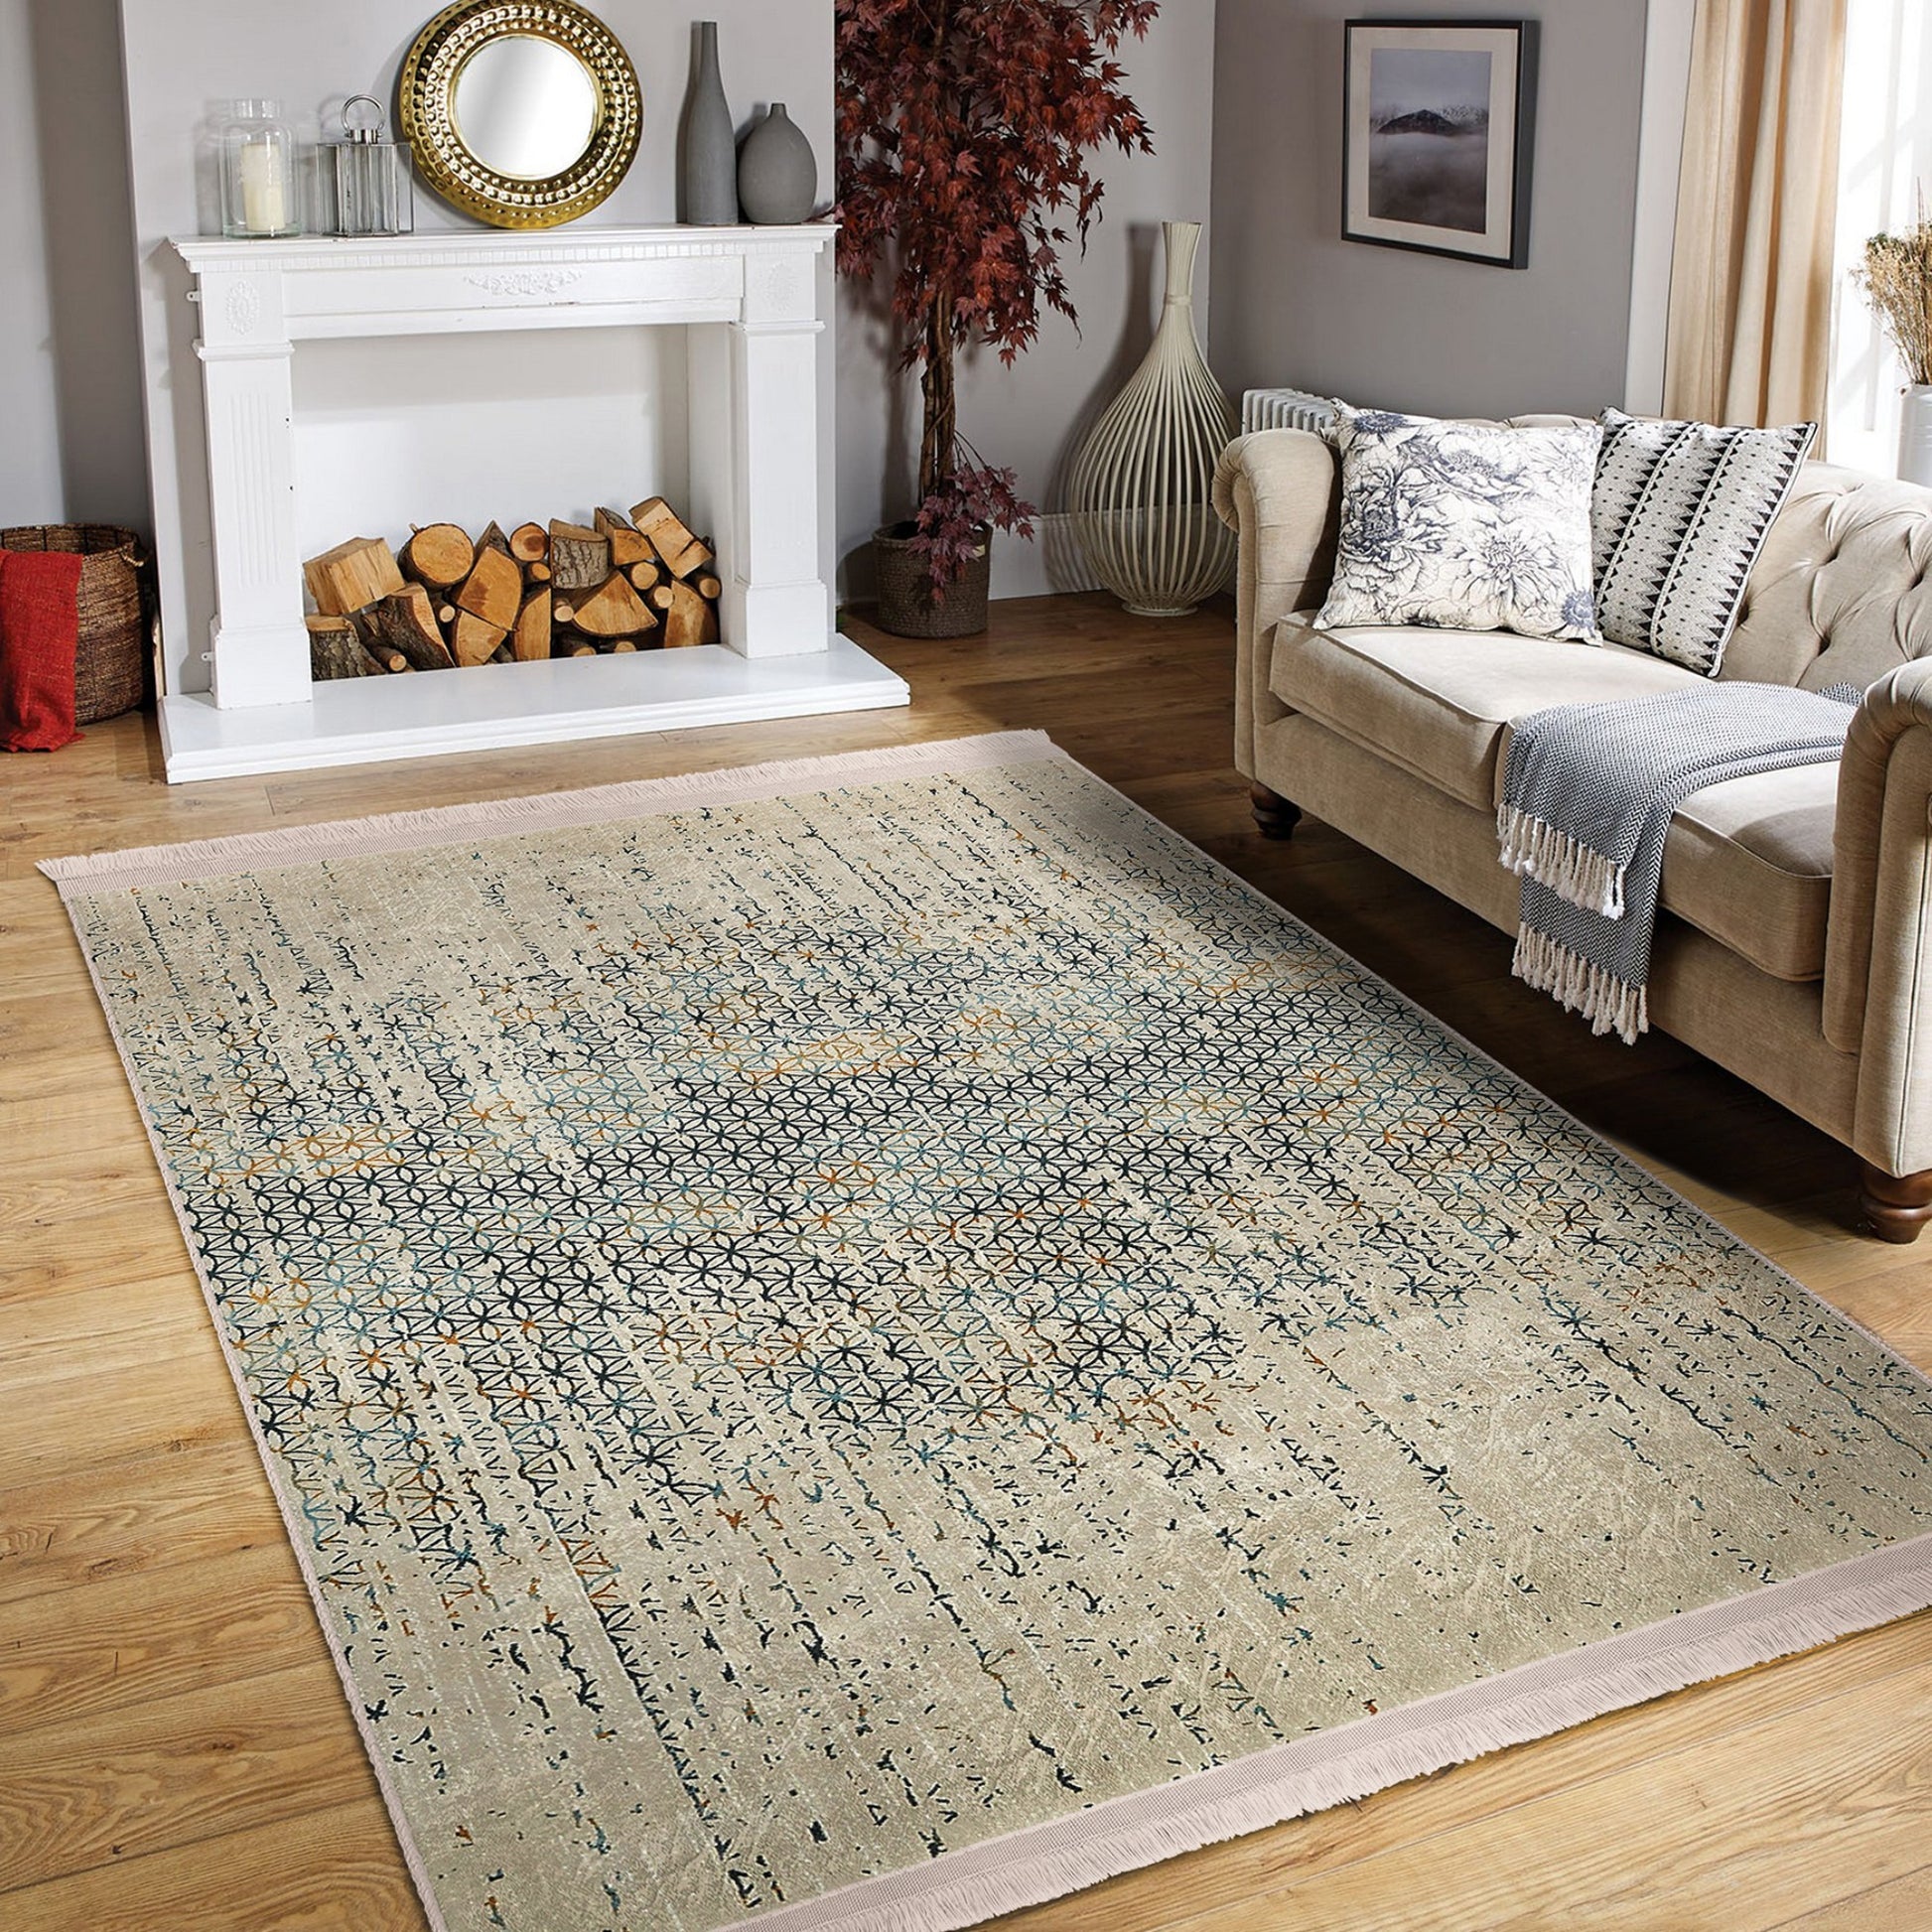 Decorative Area Rug with Natural Texture and Elegance